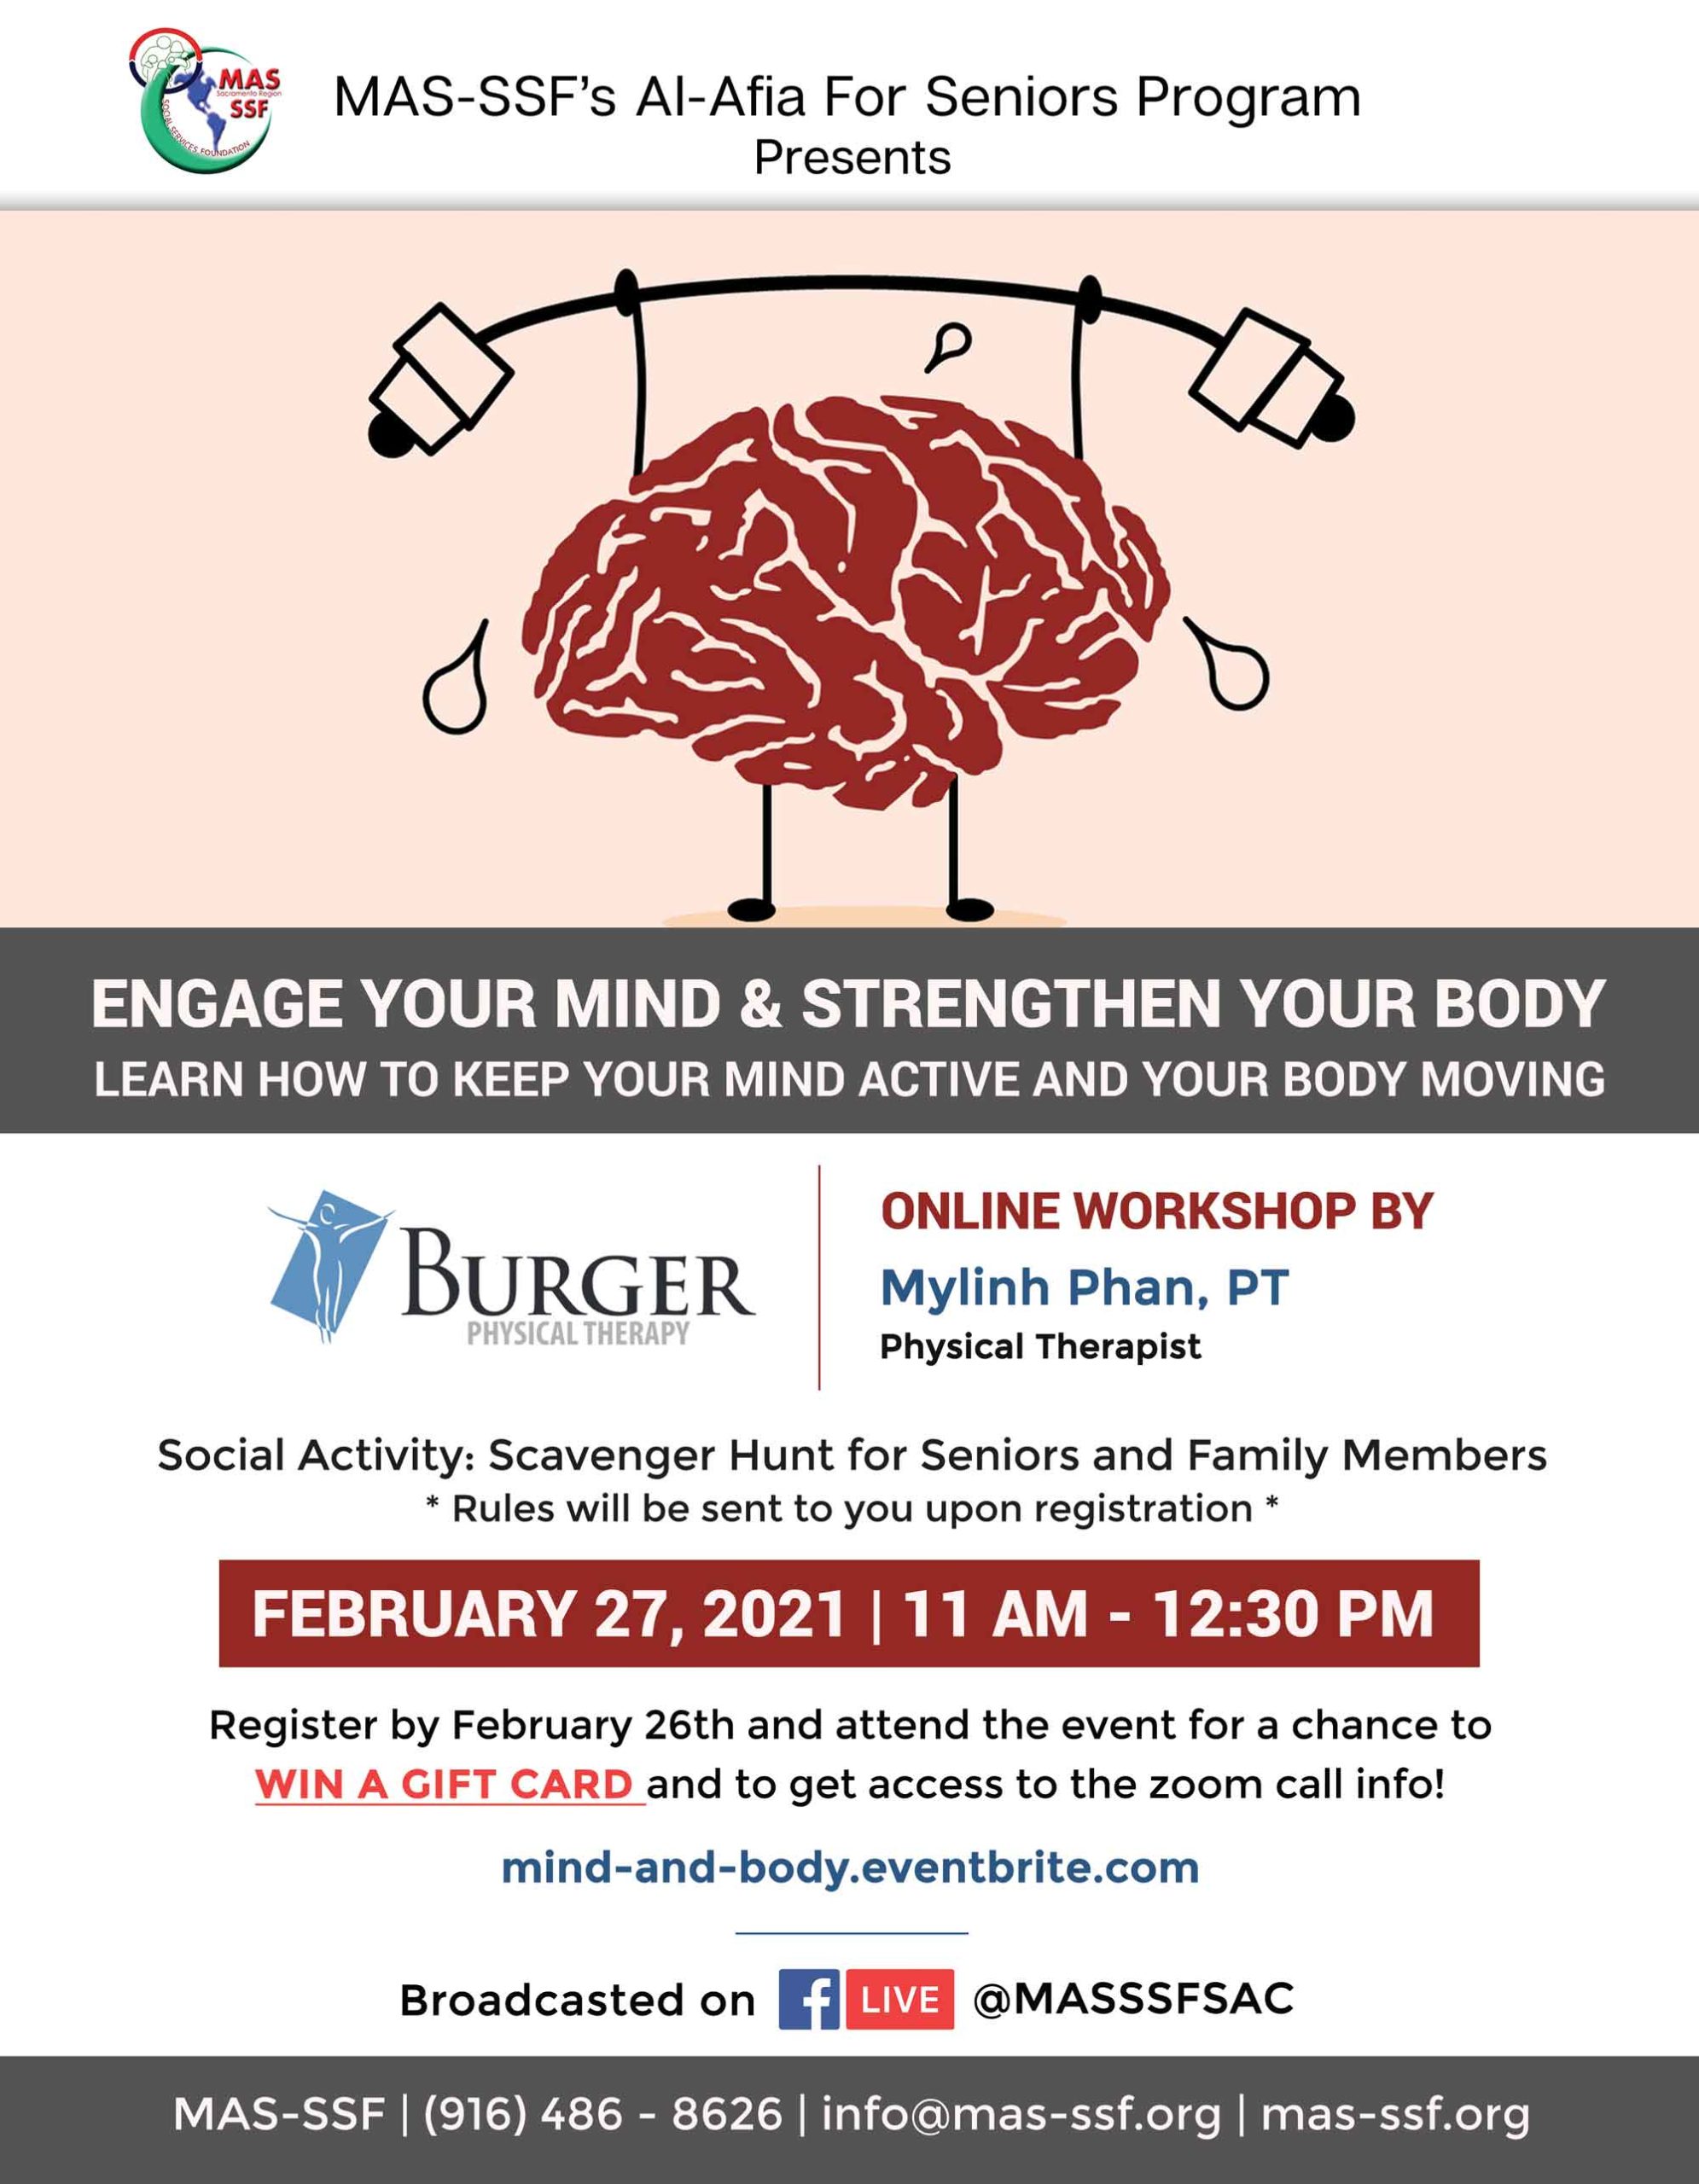 Engage Your Mind & Strengthen Your Body